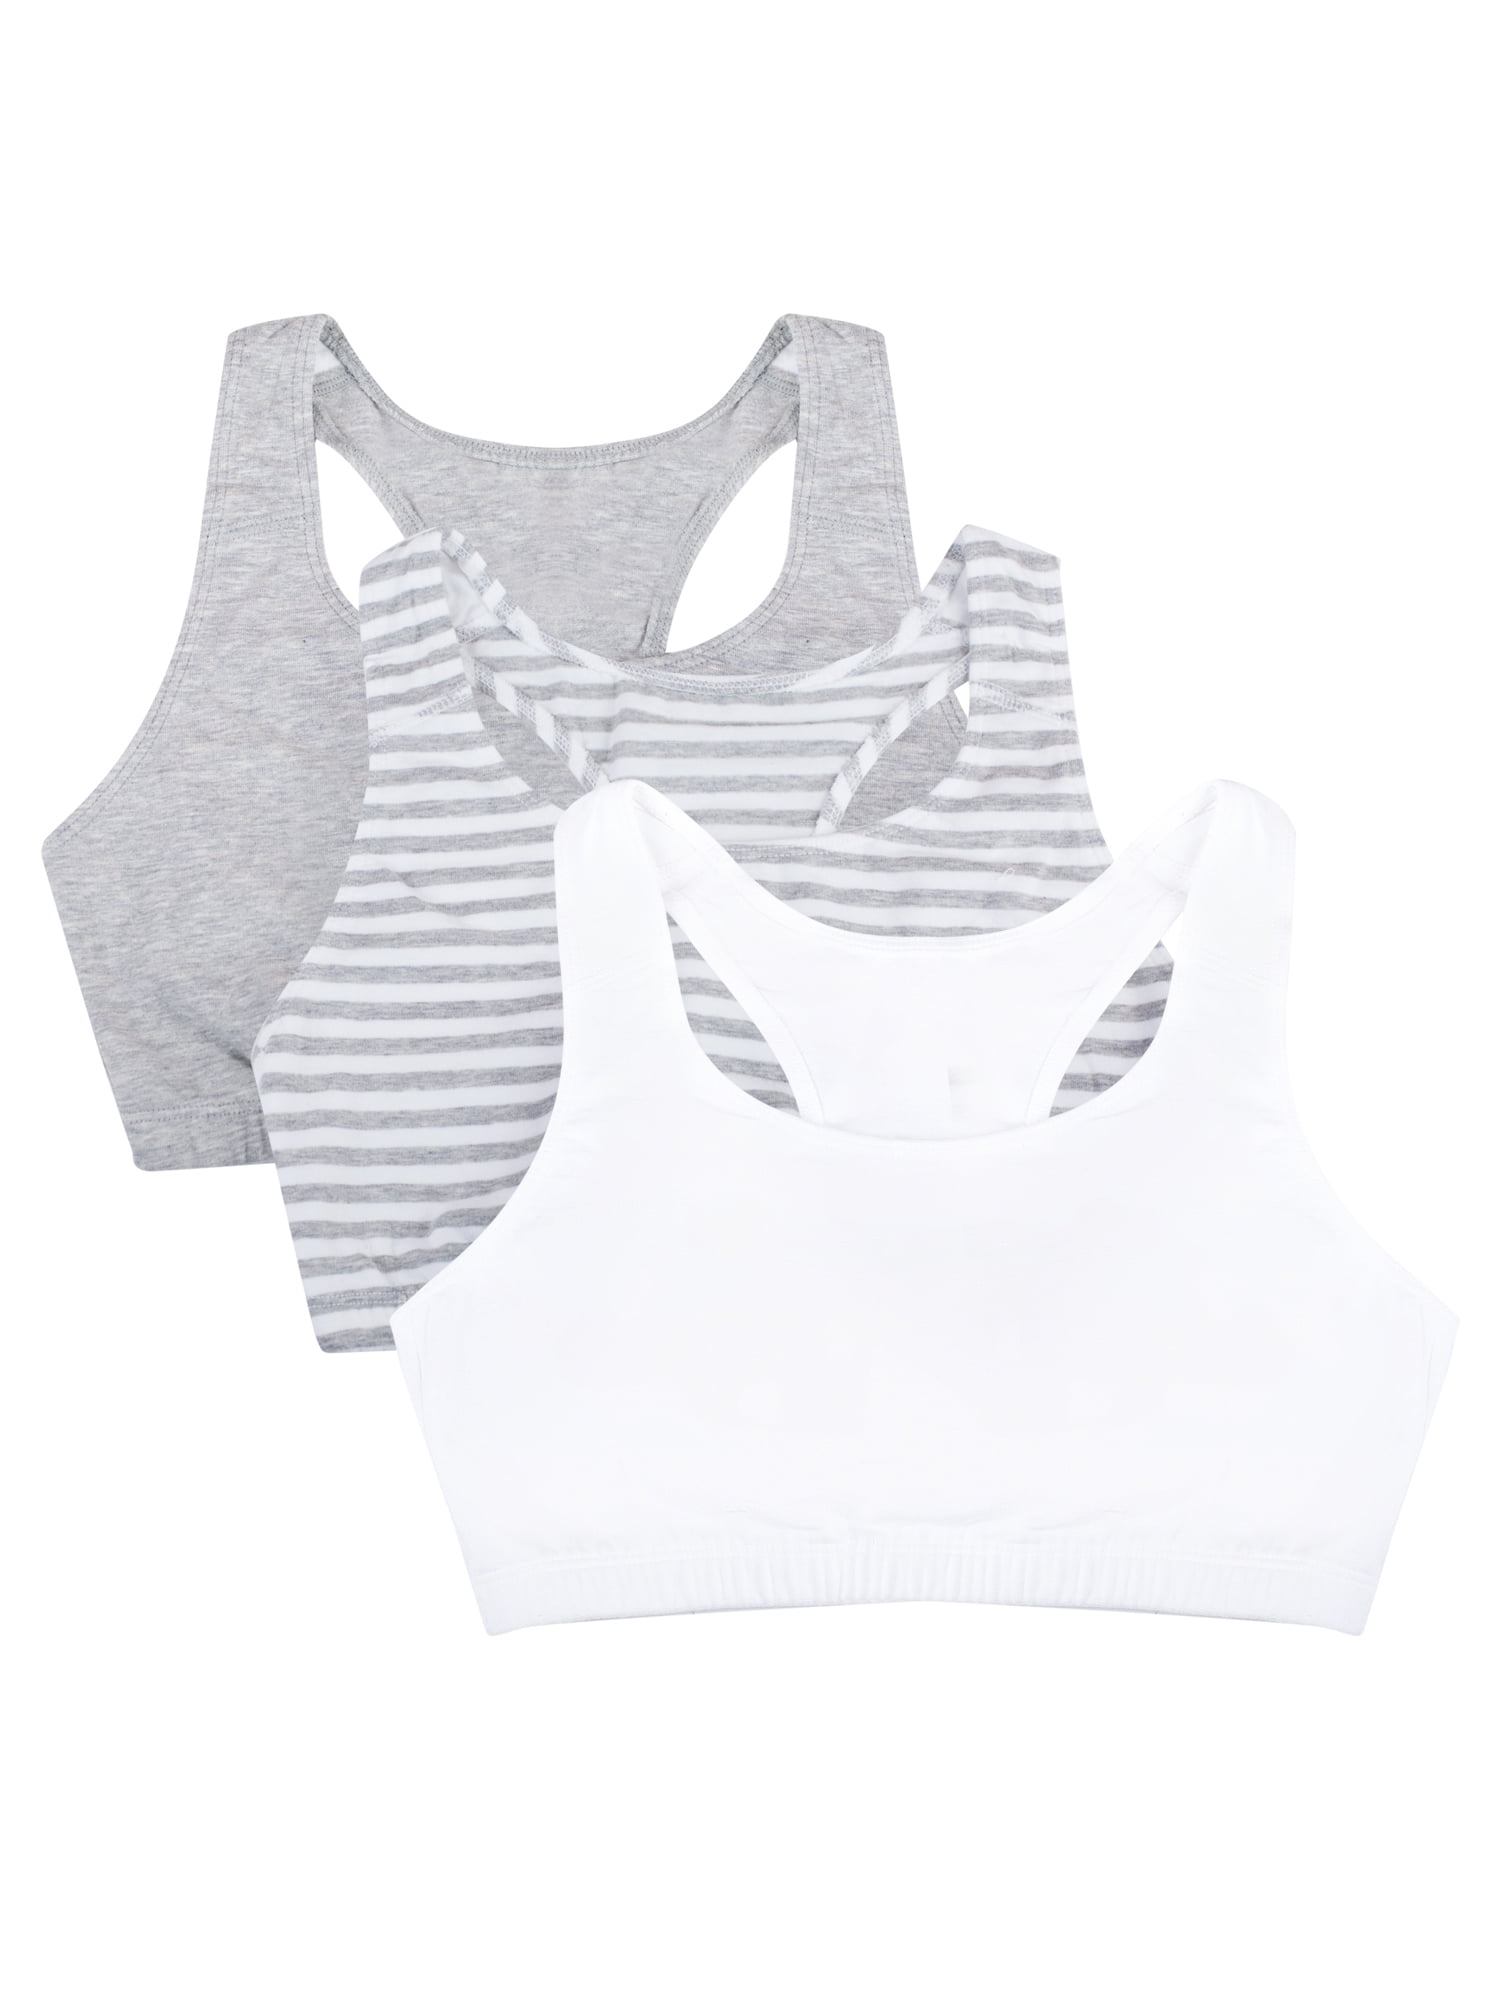 Fruit of the Loom Women's Tank Style Cotton Sports Bra 3-Pack Heather Grey  with Black/White/Black 36